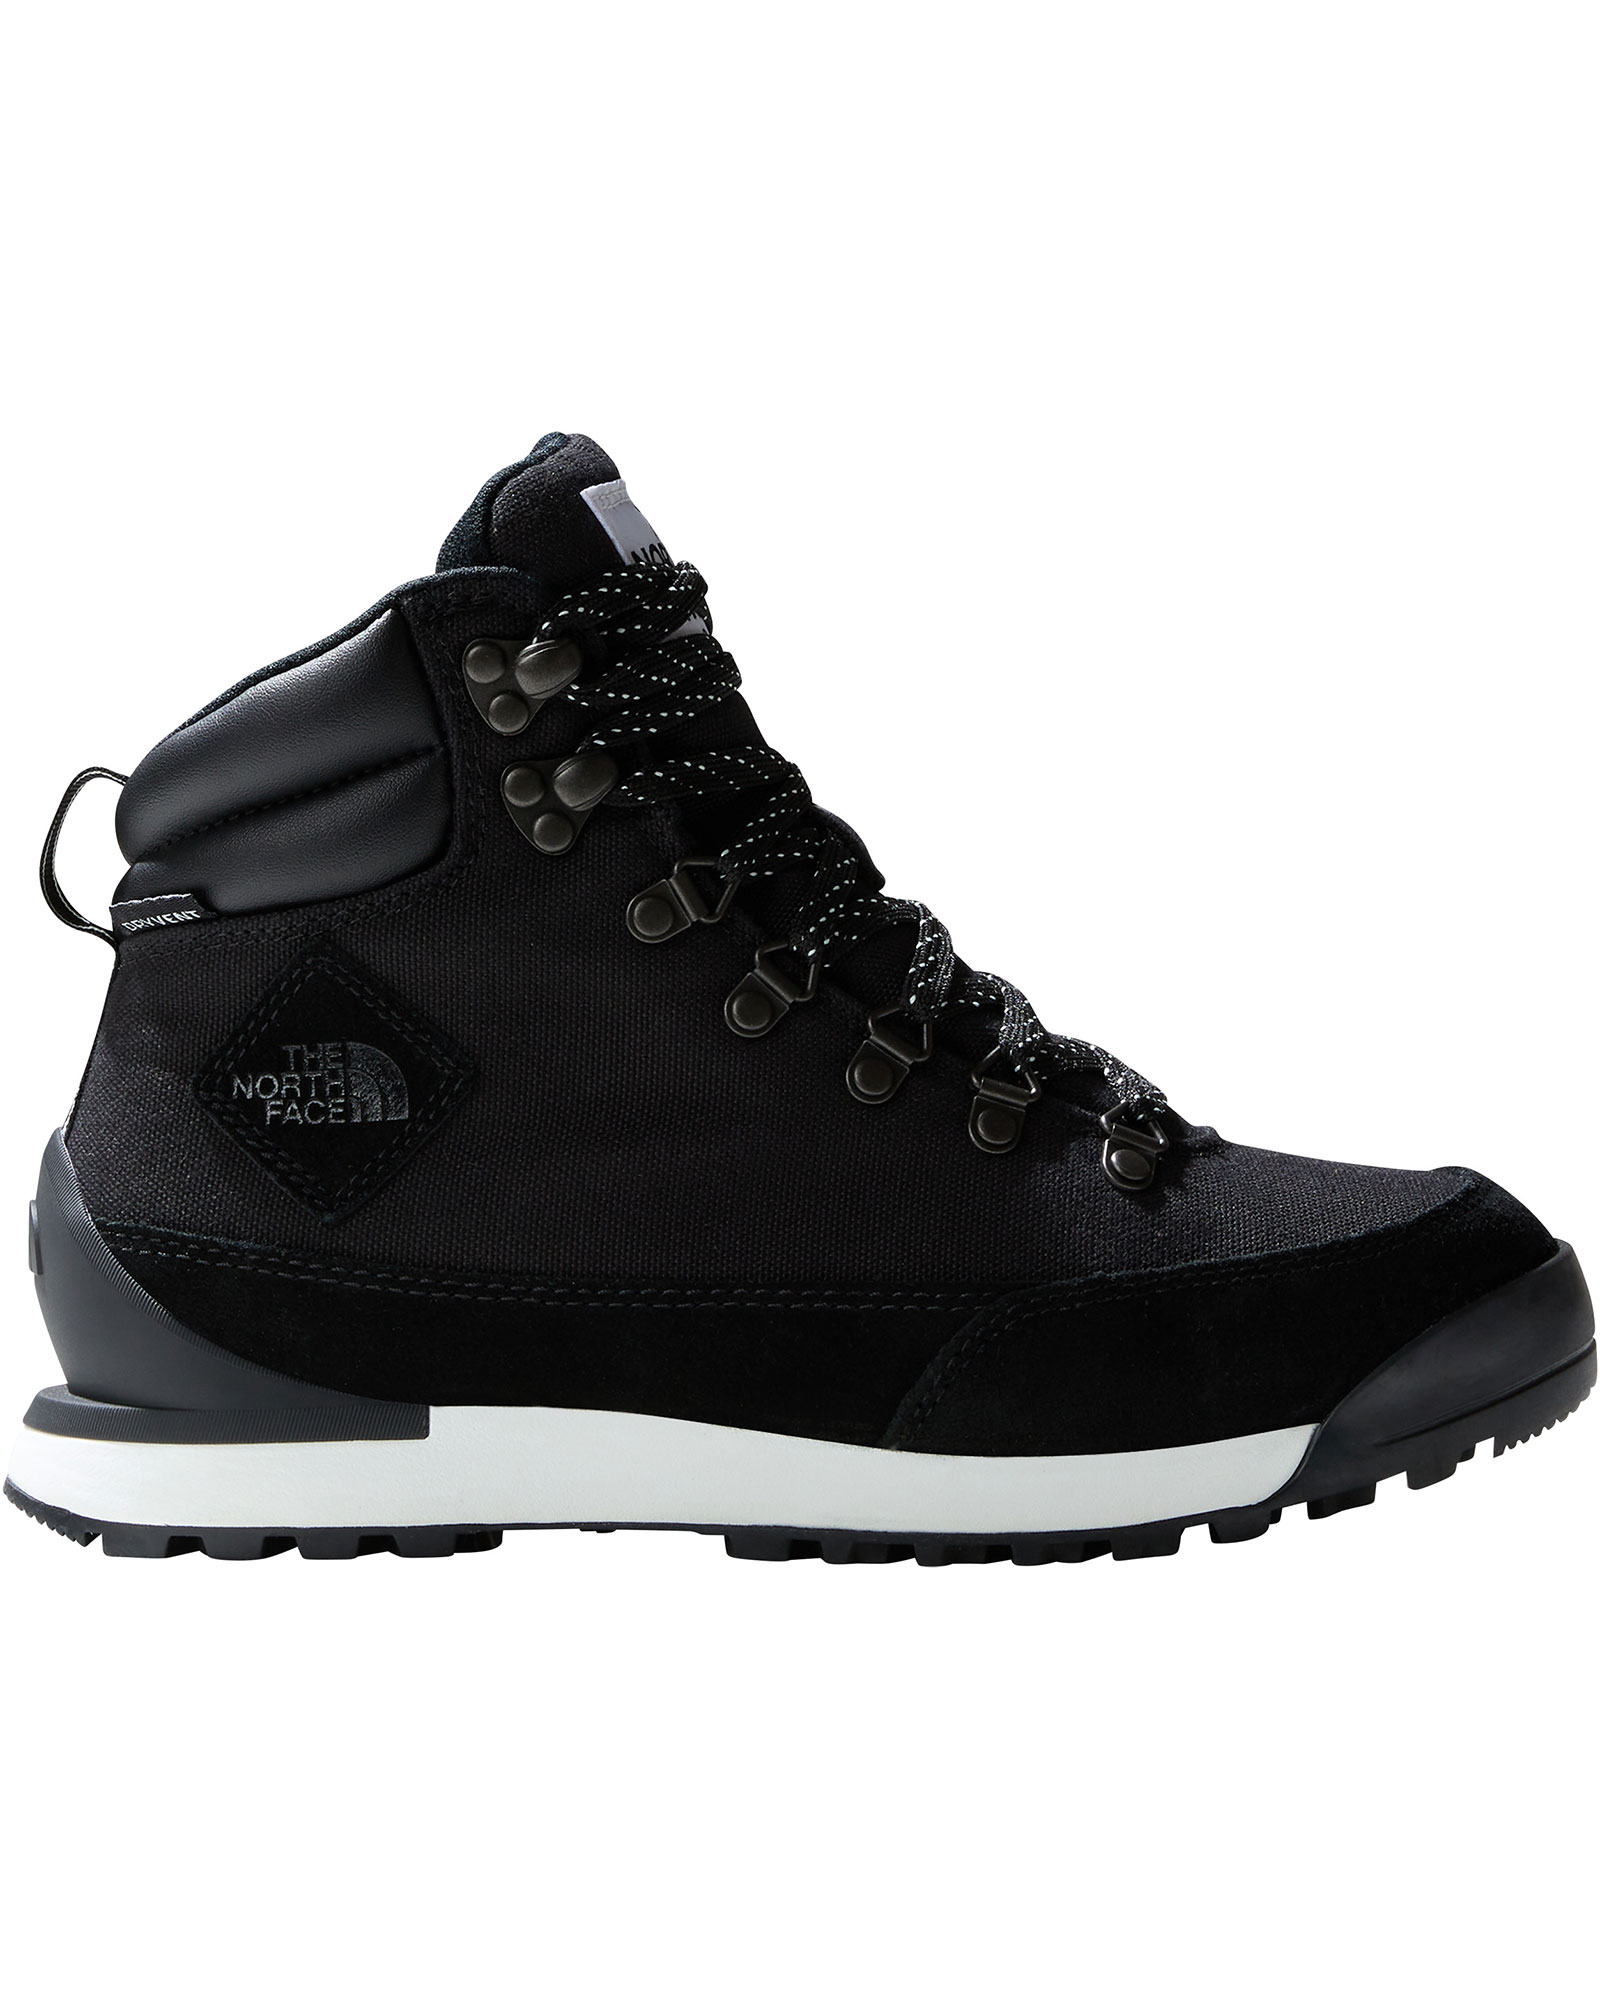 The North Face Back to Berkeley IV Textile Waterproof Women’s Boots - TNF Black/TNF White UK 8